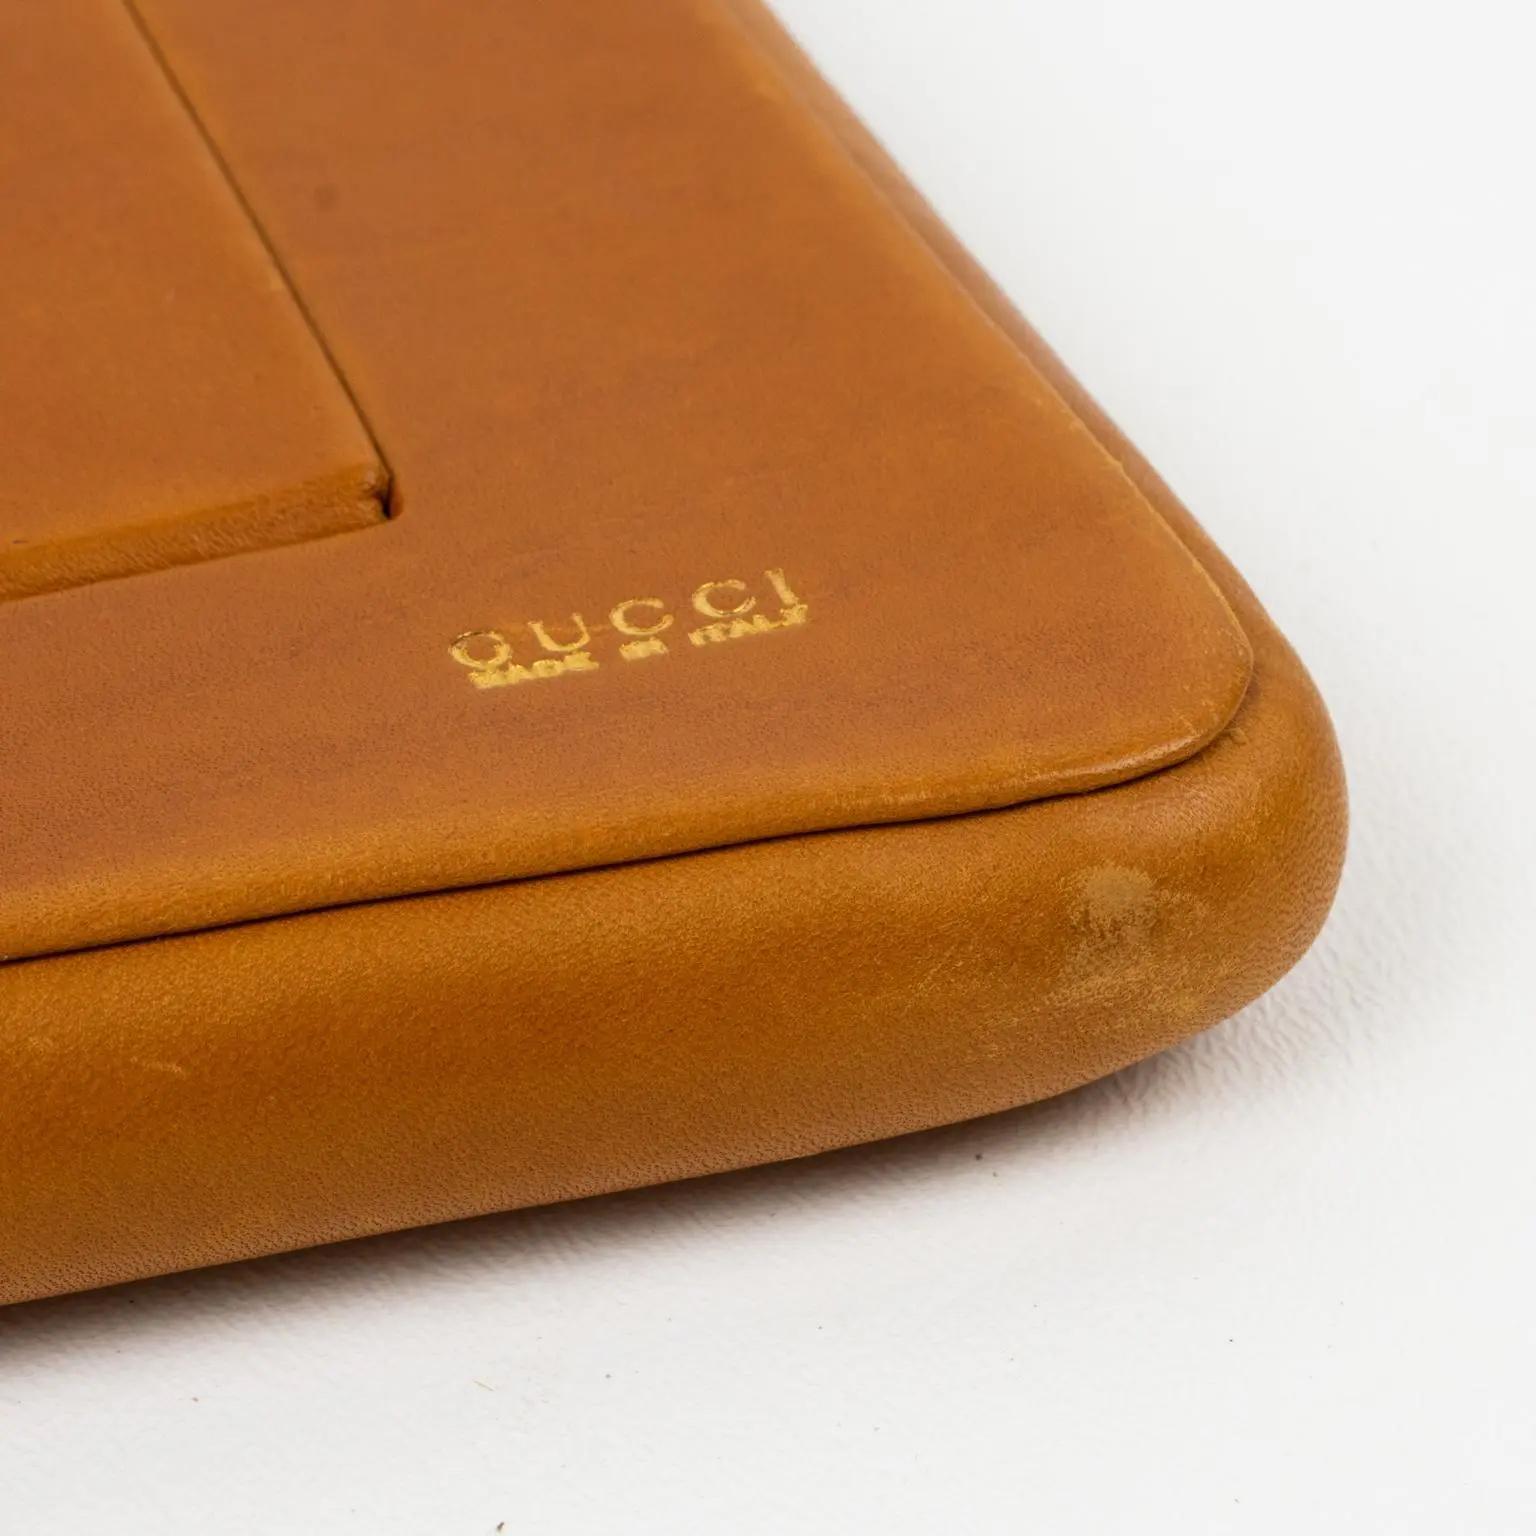 Gucci, Italy Cognac Leather Picture Frame, 1970s 3